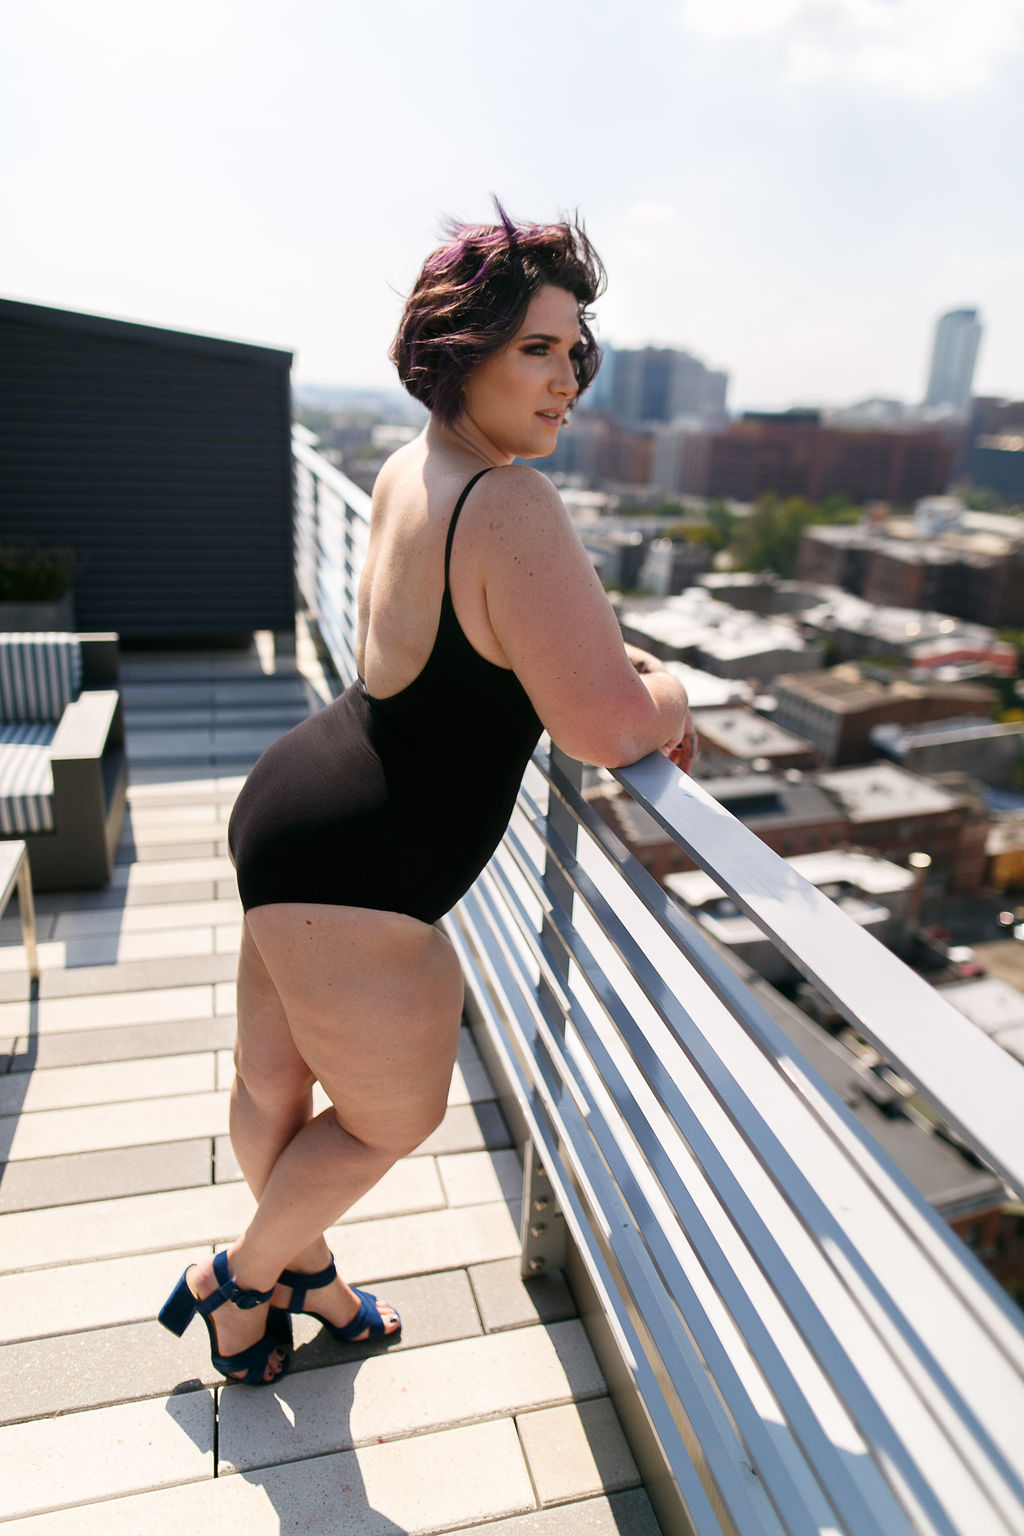 Philly Outdoor Rooftop Boudoir Session by Swiger Photography 35.jpg